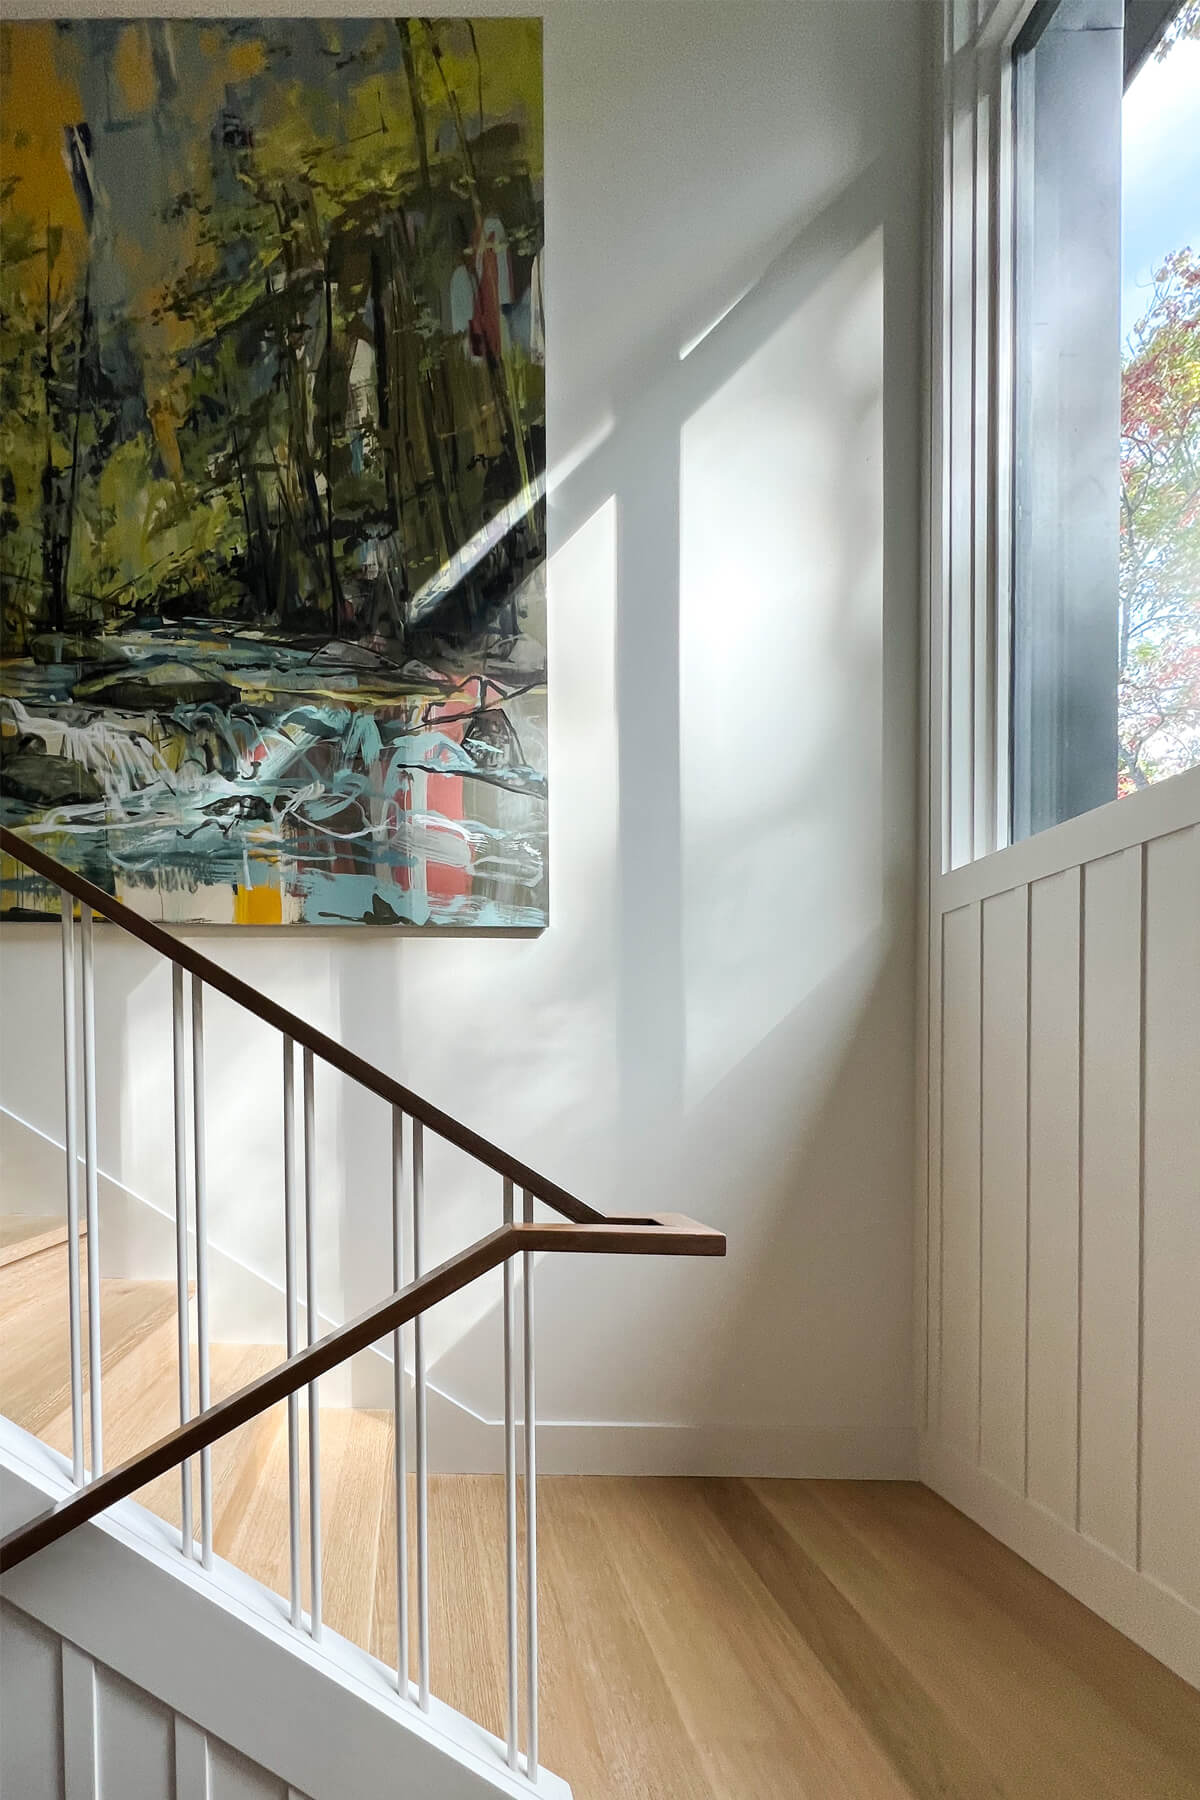 Staircase Architectural Details at The Lookout Residence - Altura Architects